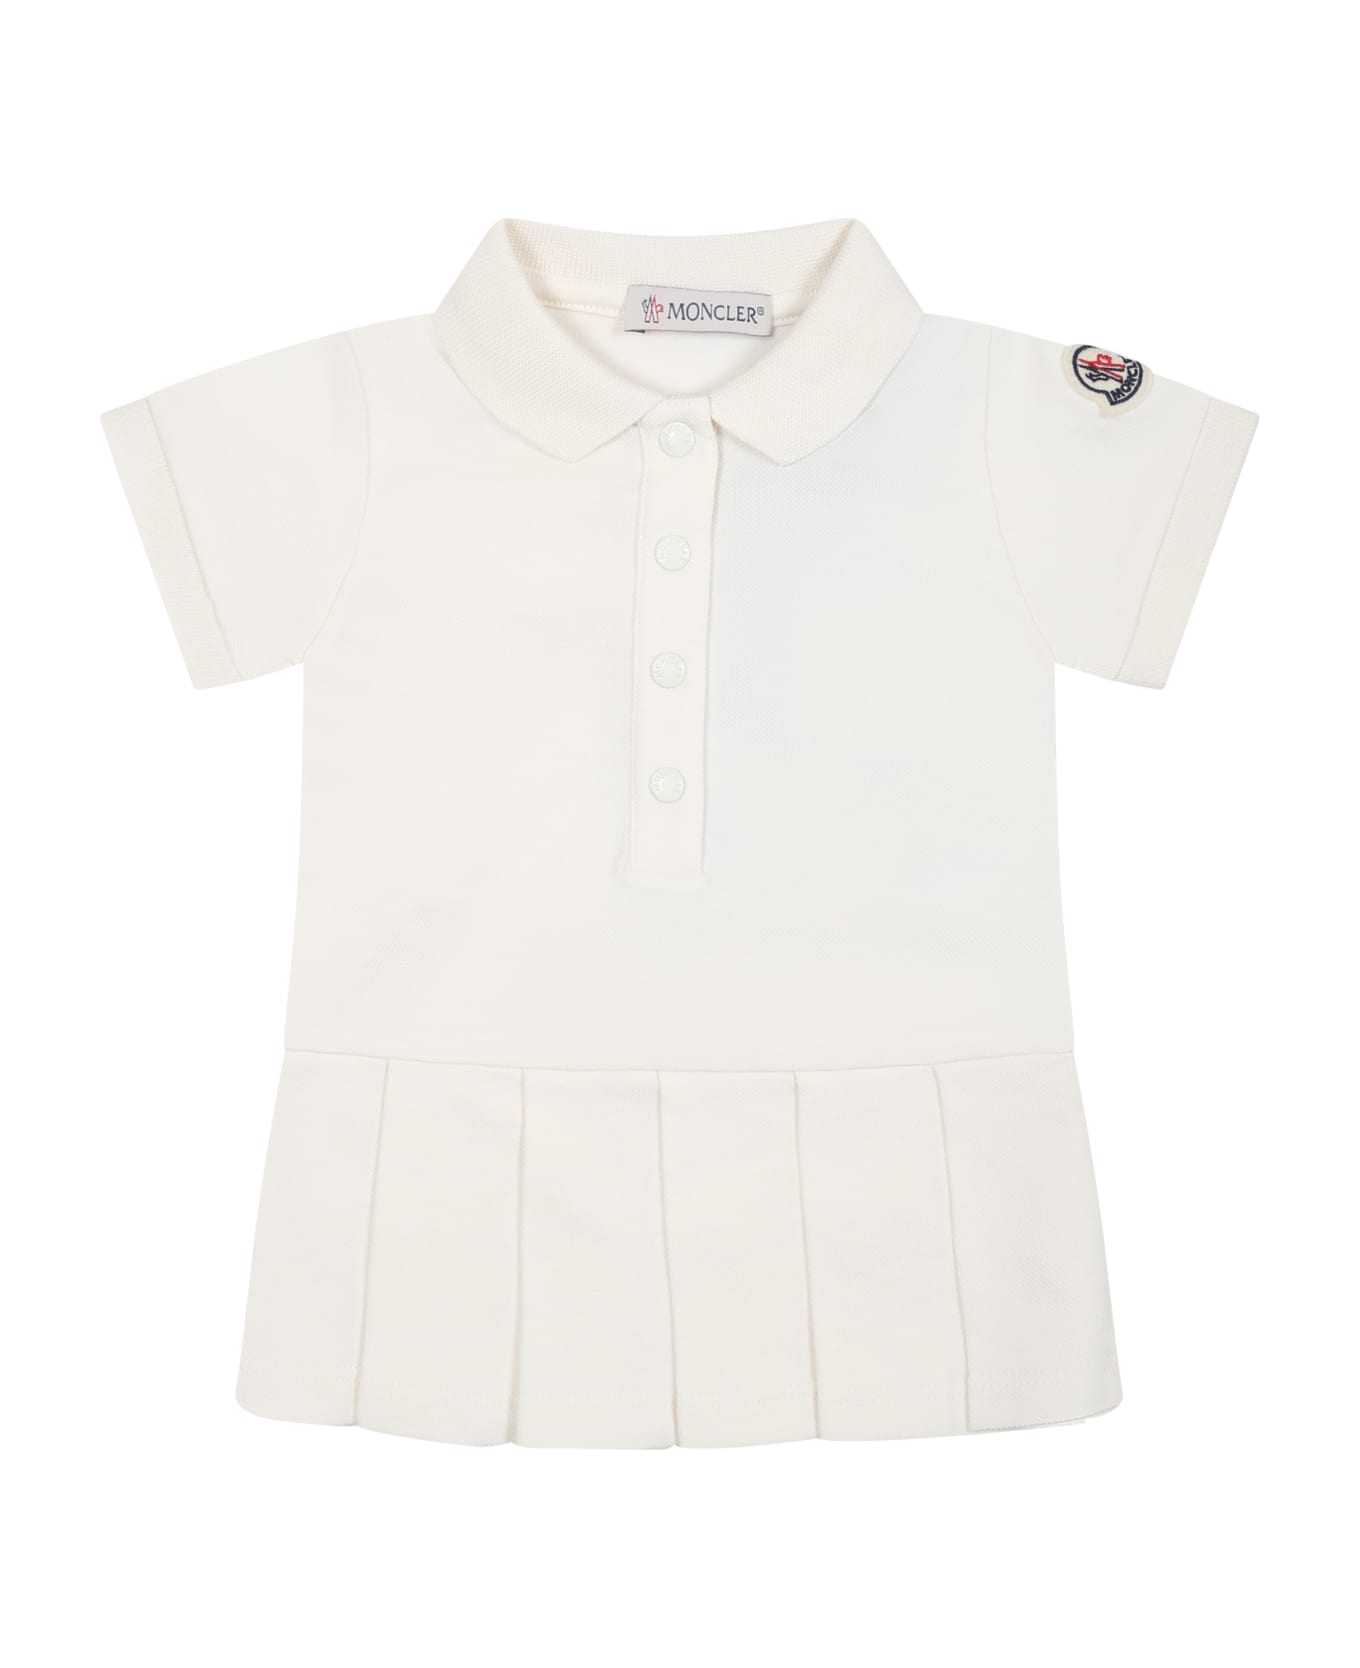 Moncler Pink Dress For Baby Girl With Logo - White